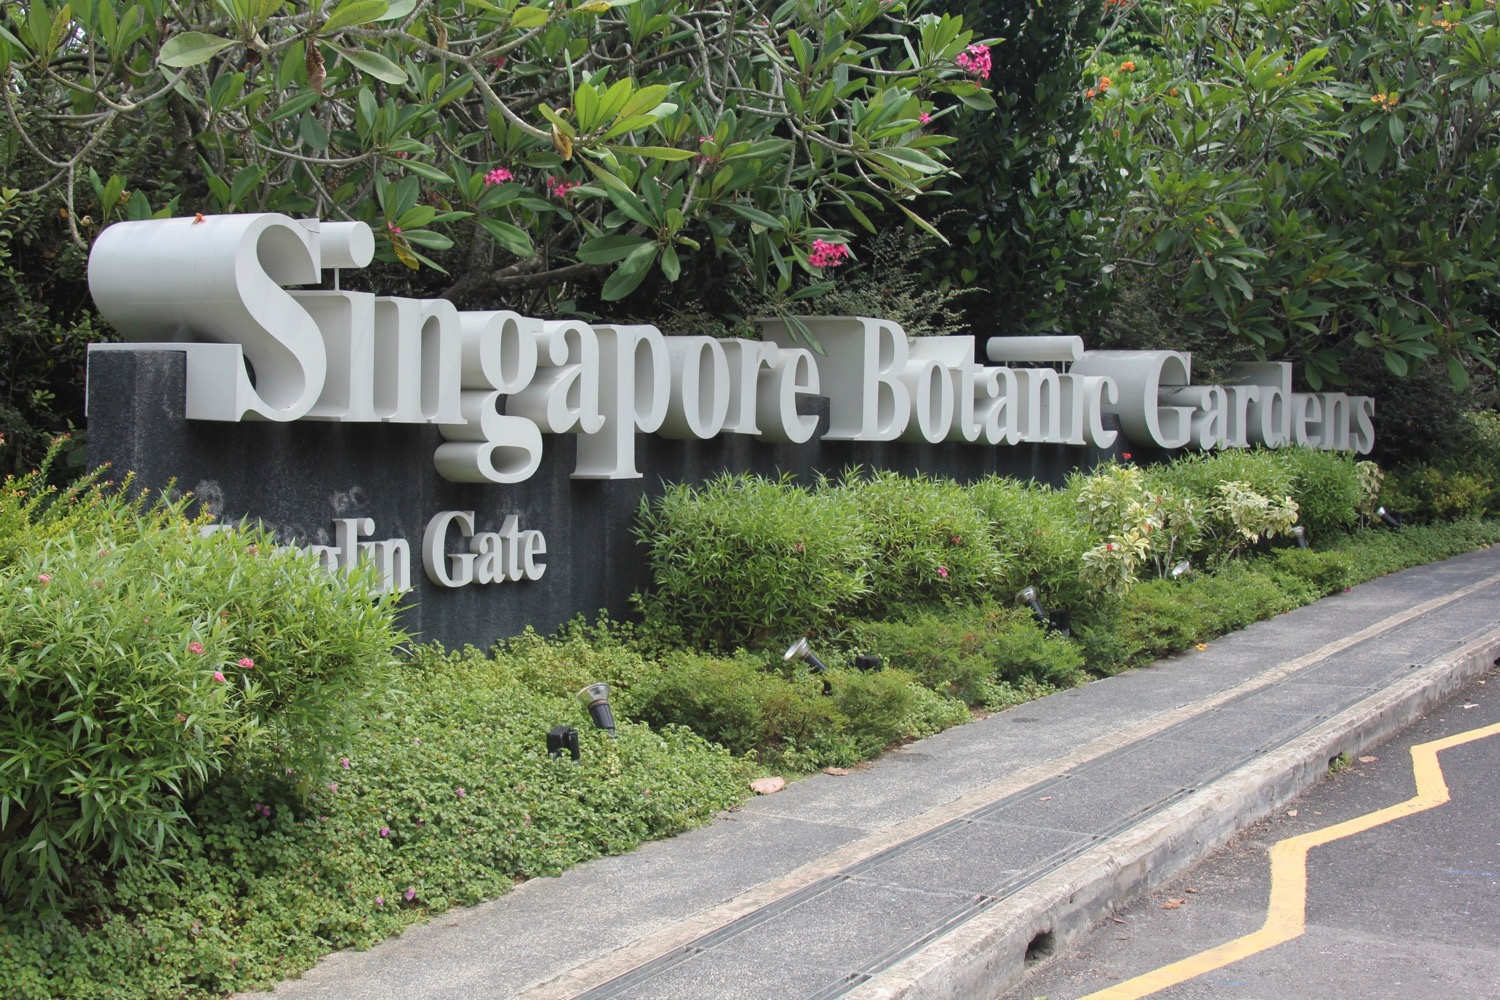 Must See: Singapore Botanic Gardens - Live and Let's Fly